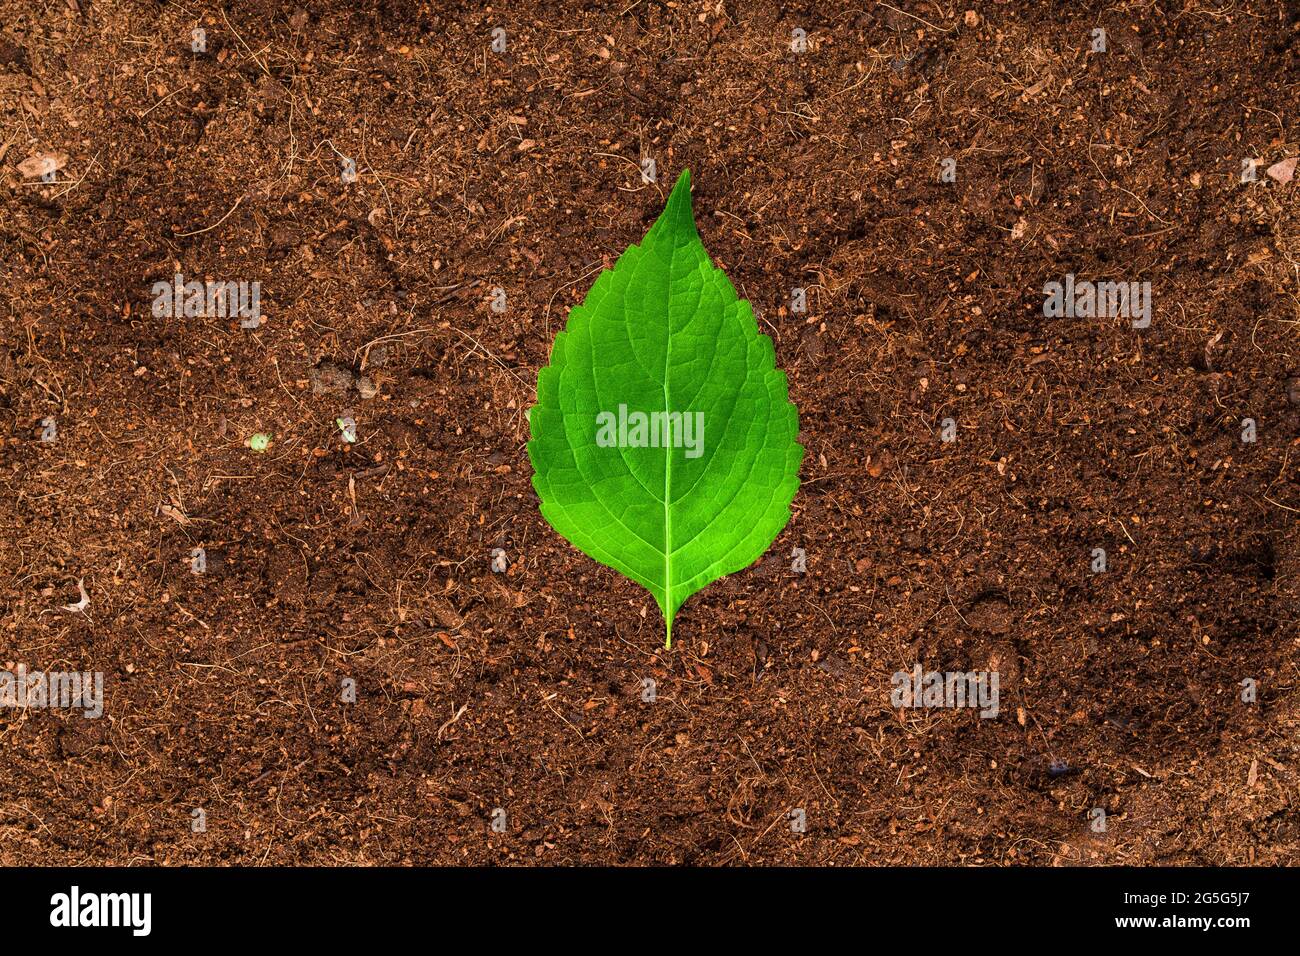 A green leaf on wet land Stock Photo